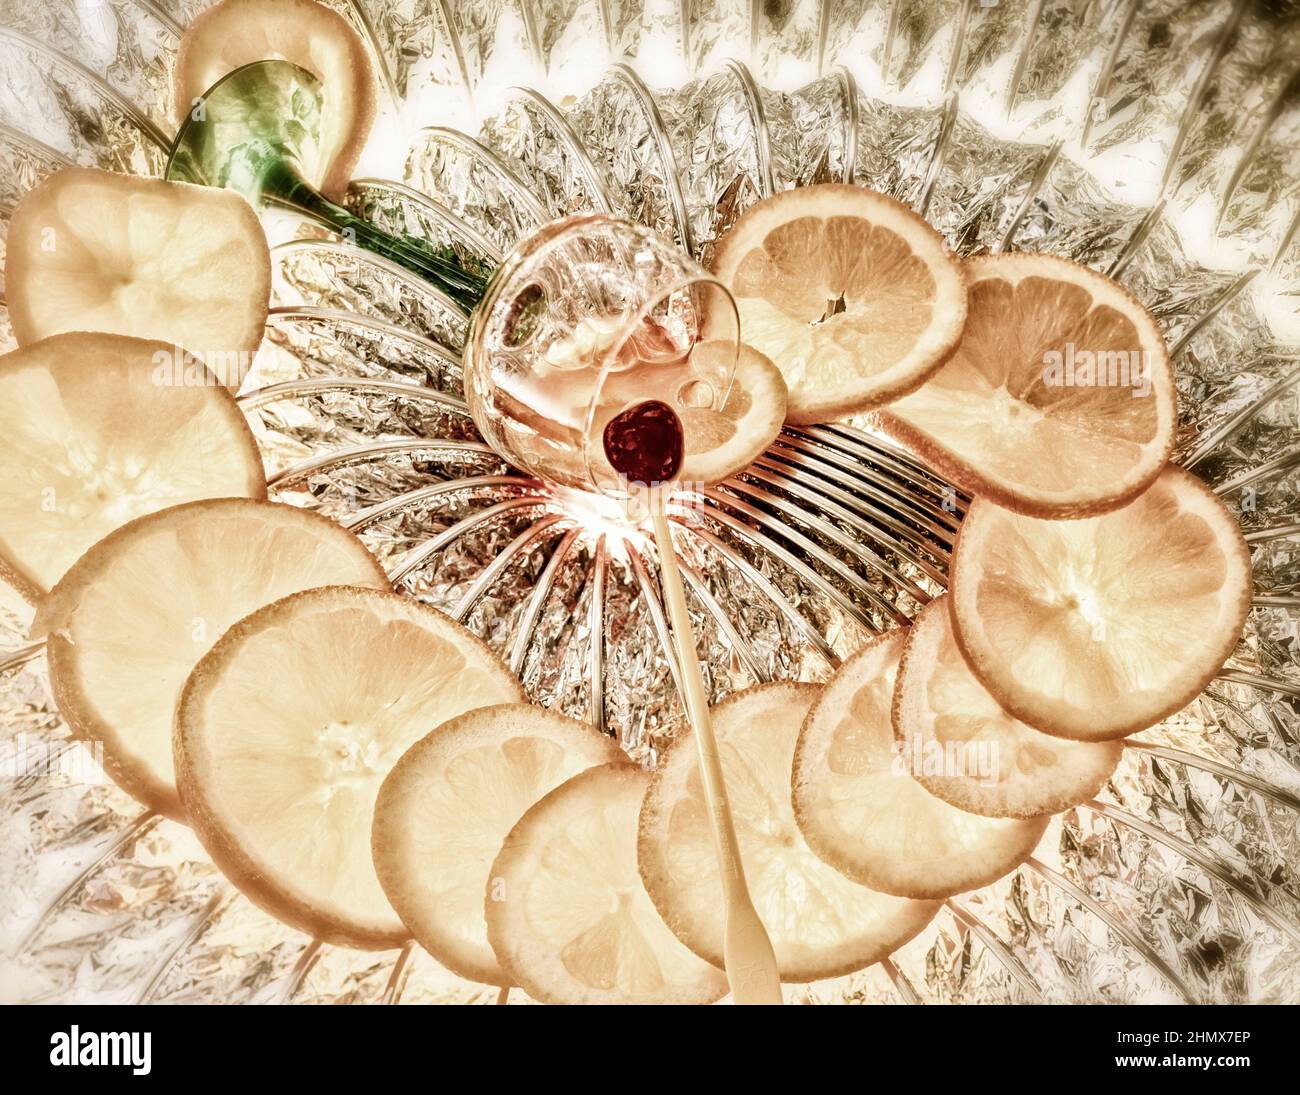 Abstract food still-life of Orange slices, and single cherry, arranged in a spiral and backlit Stock Photo